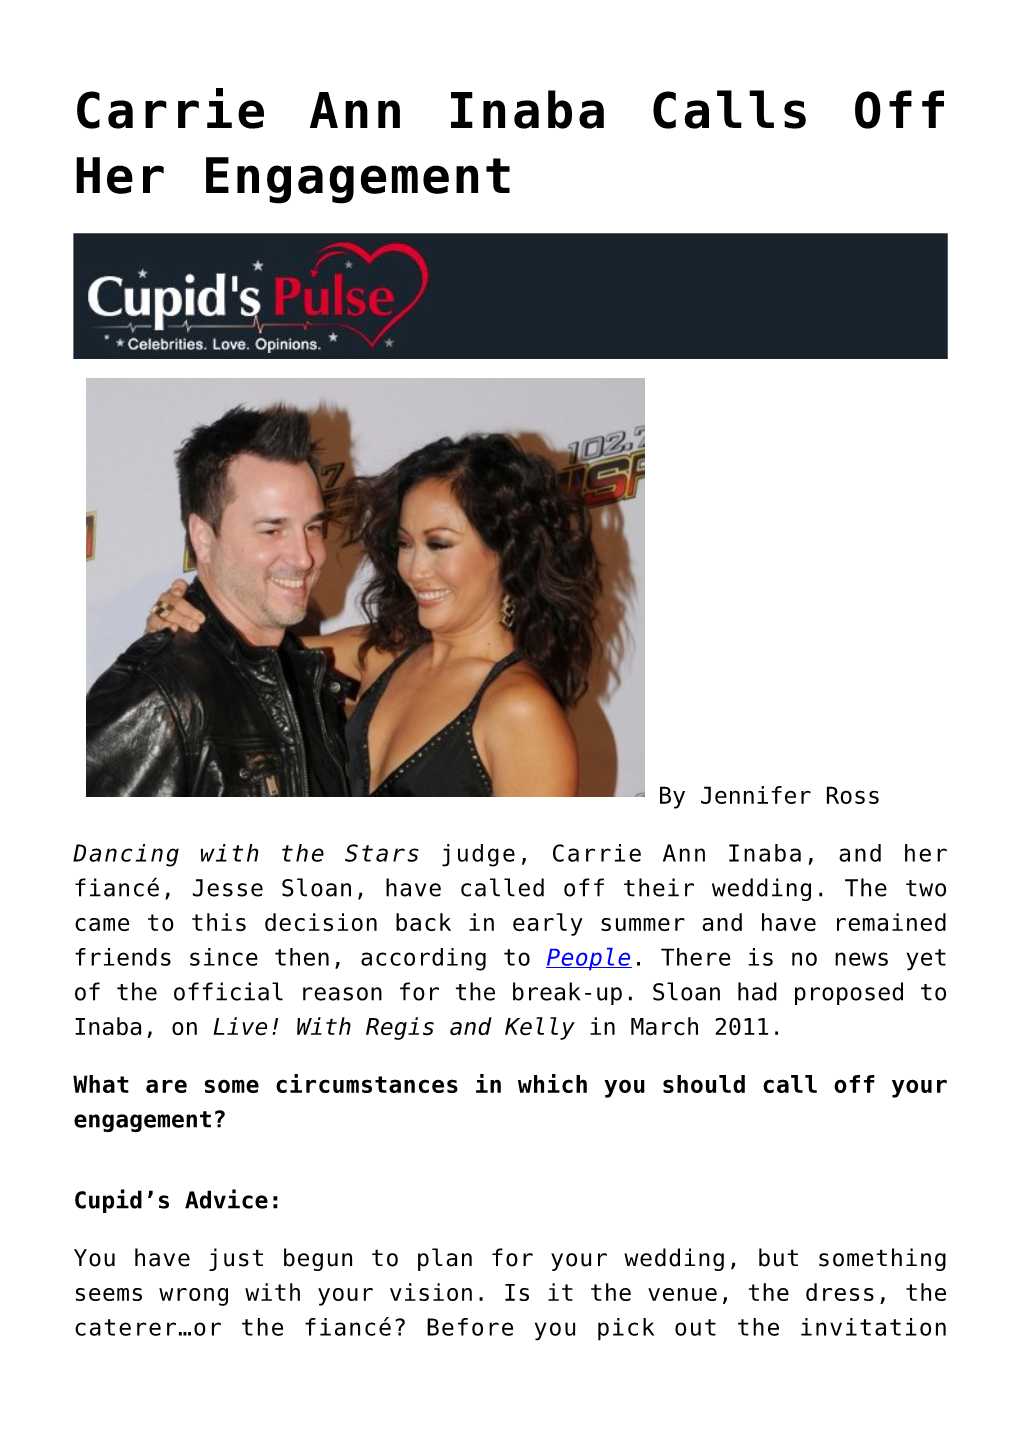 Carrie Ann Inaba Calls Off Her Engagement